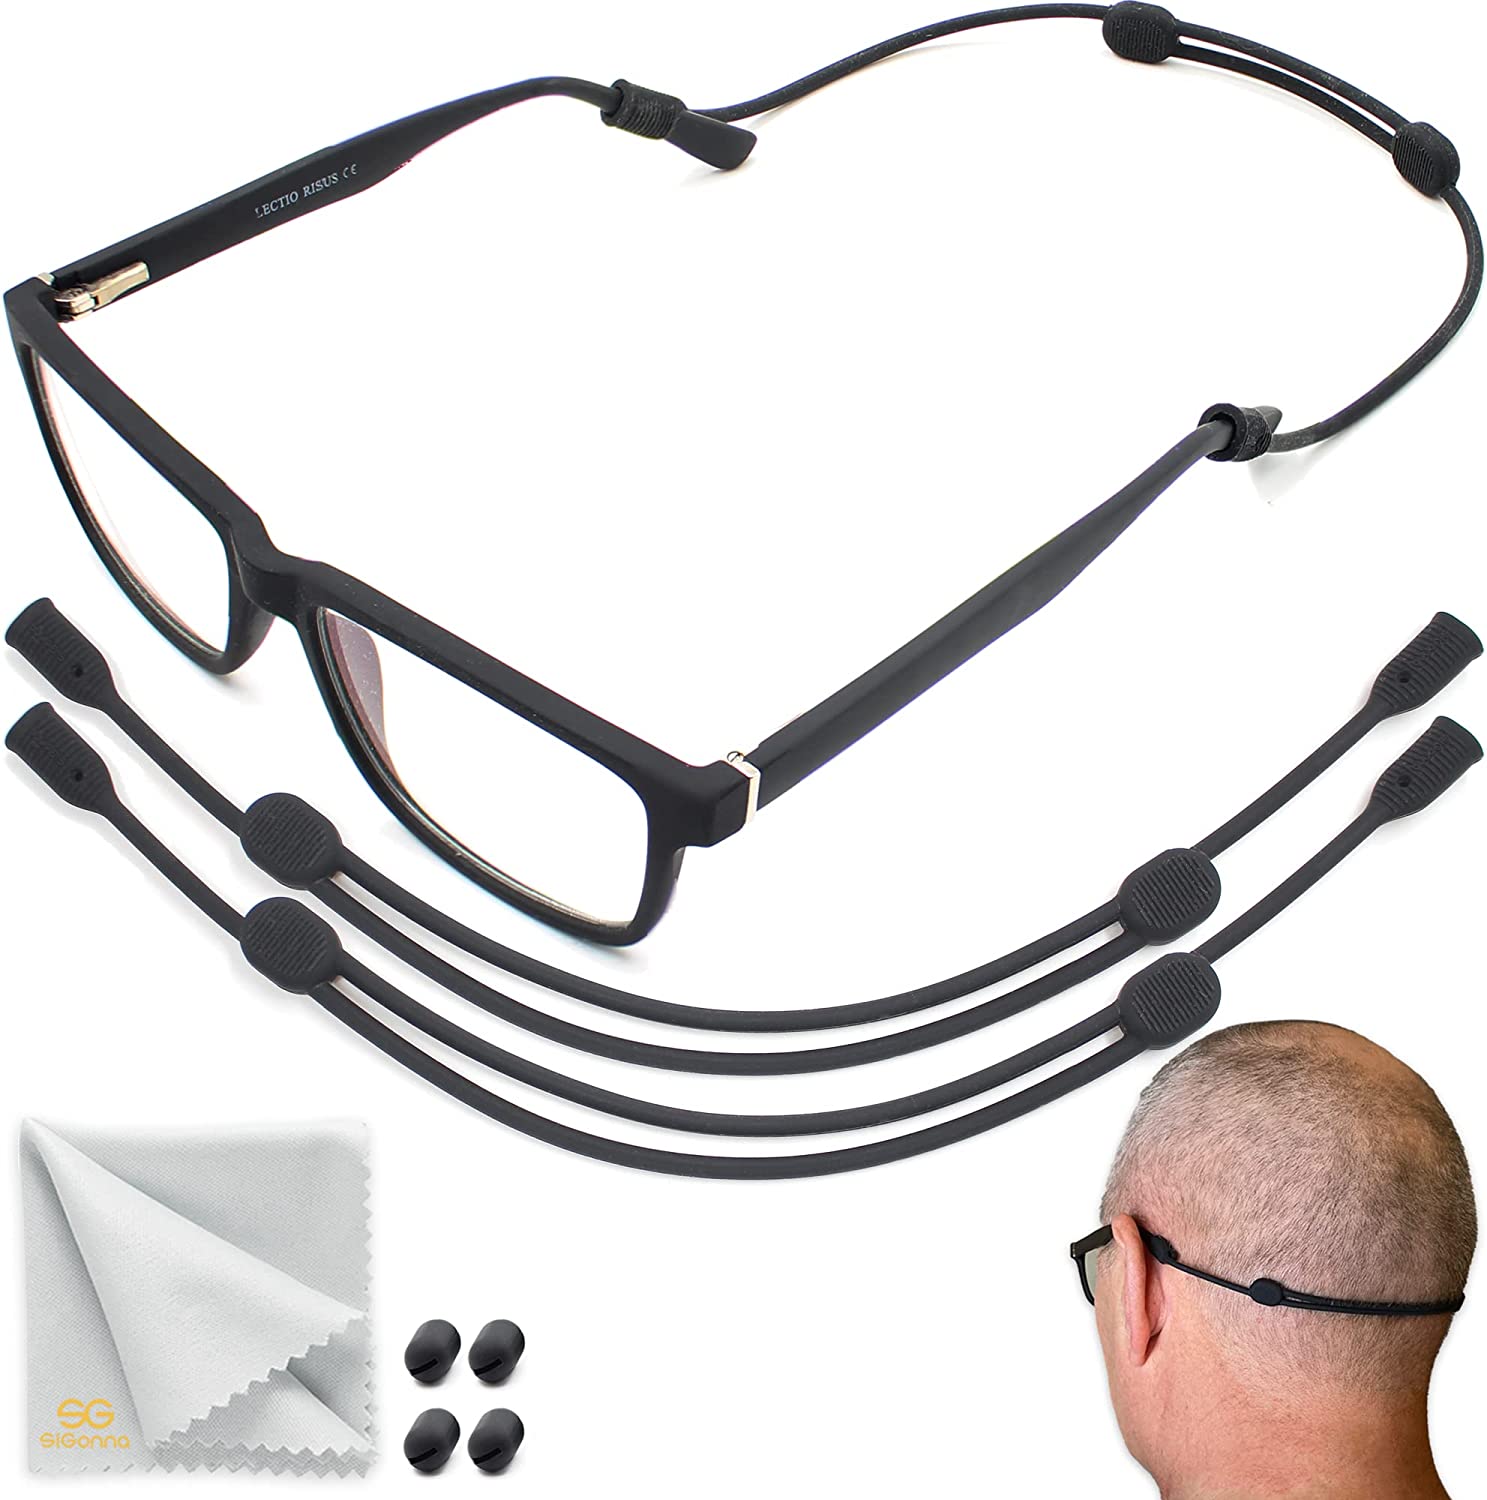 eyeglasses strap by Sigonna for any type of temples